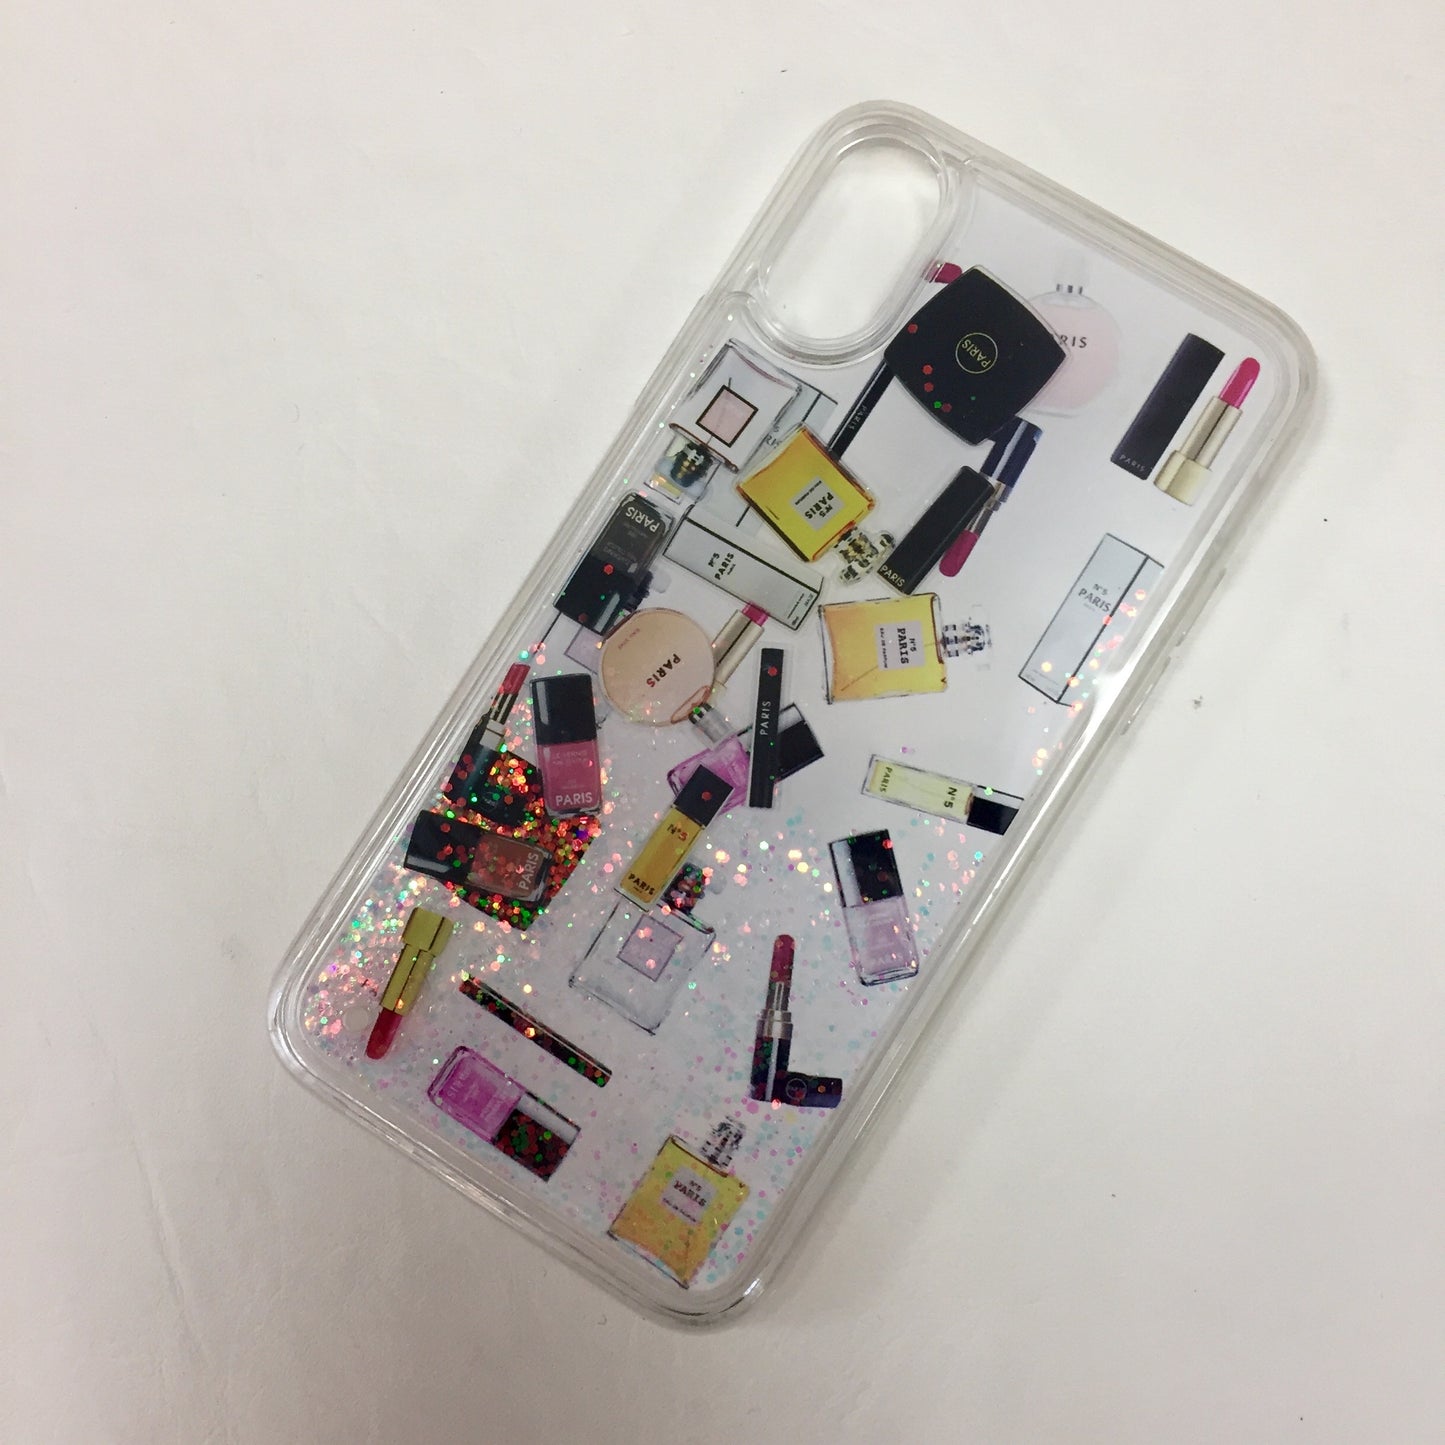 Authentic Glitter Makeup "Waterfall" iPhone Case